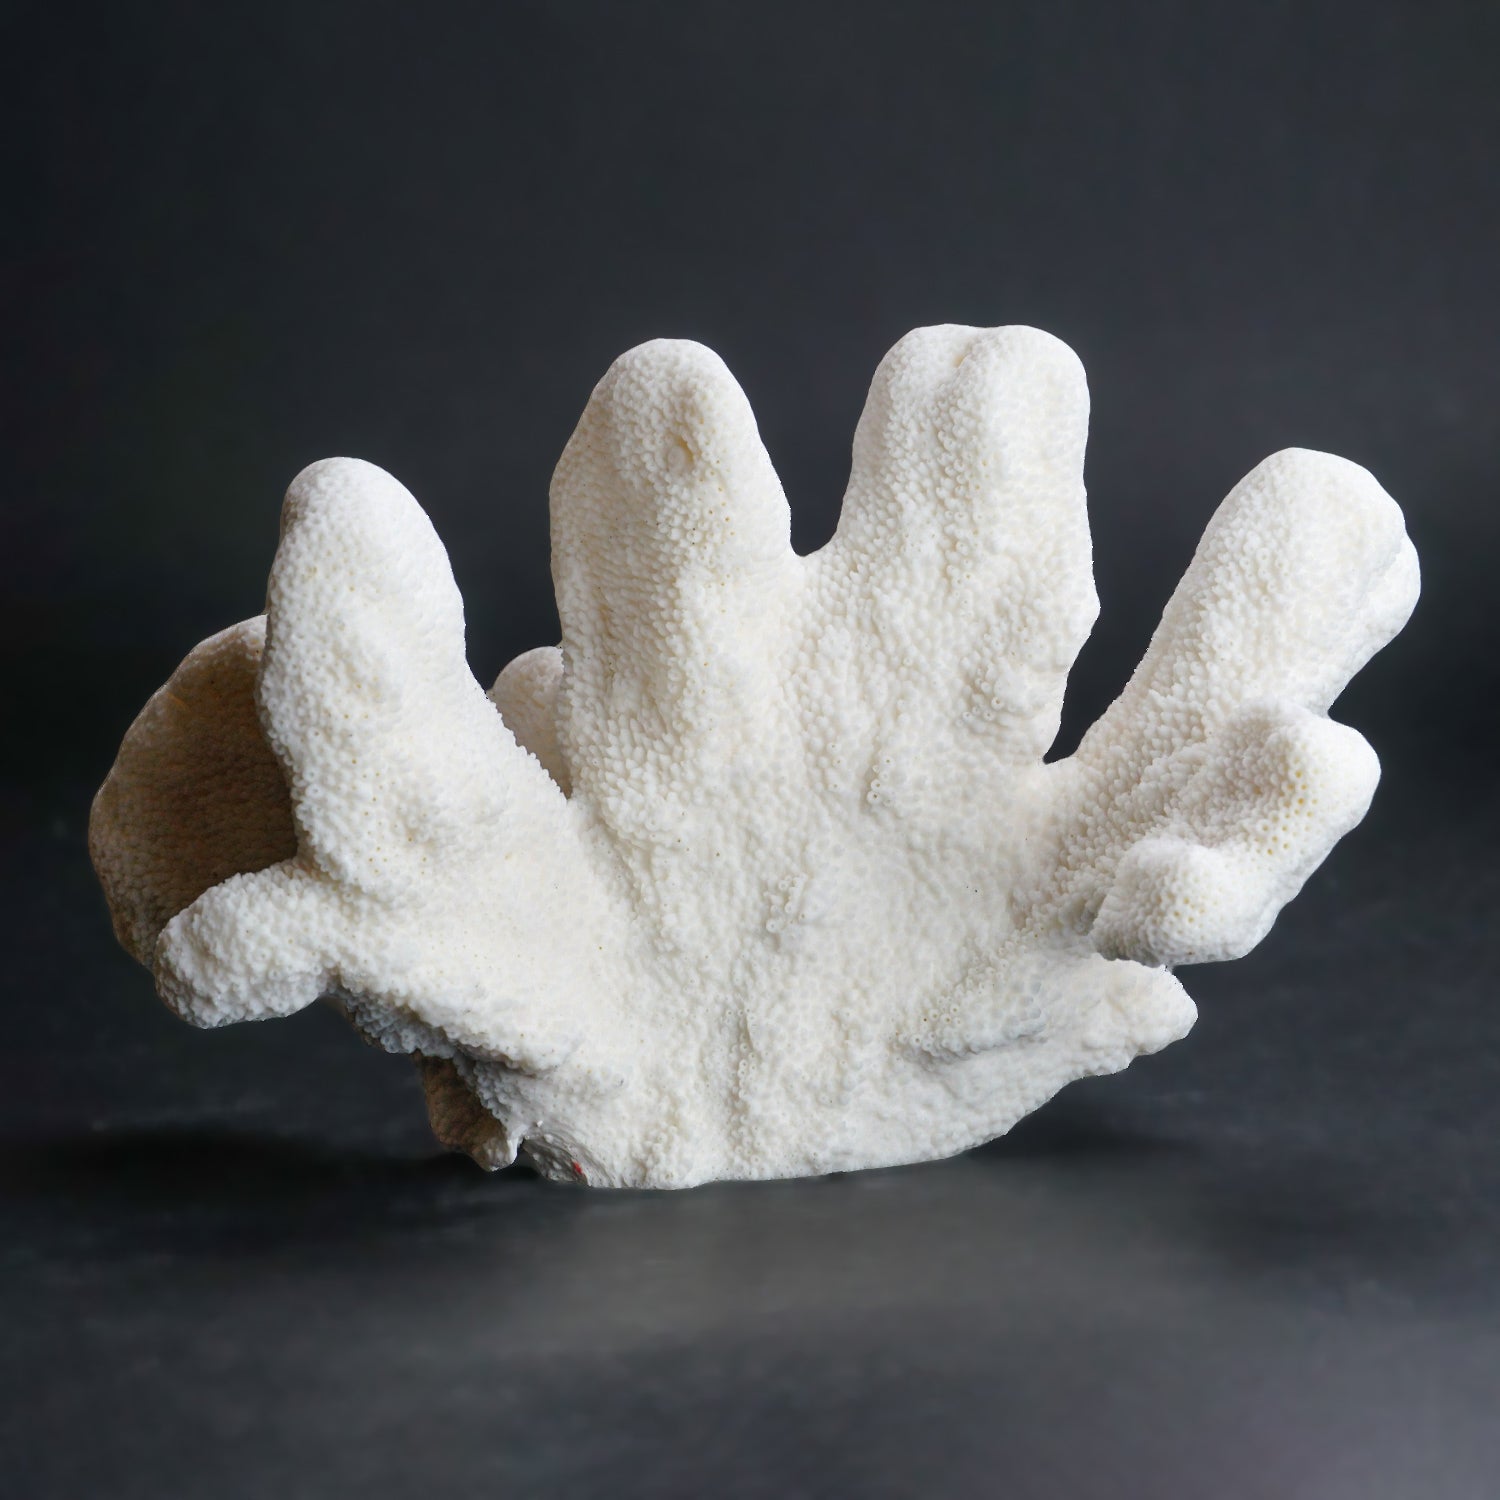 Genuine White Cat's Paw Coral (2 lbs)